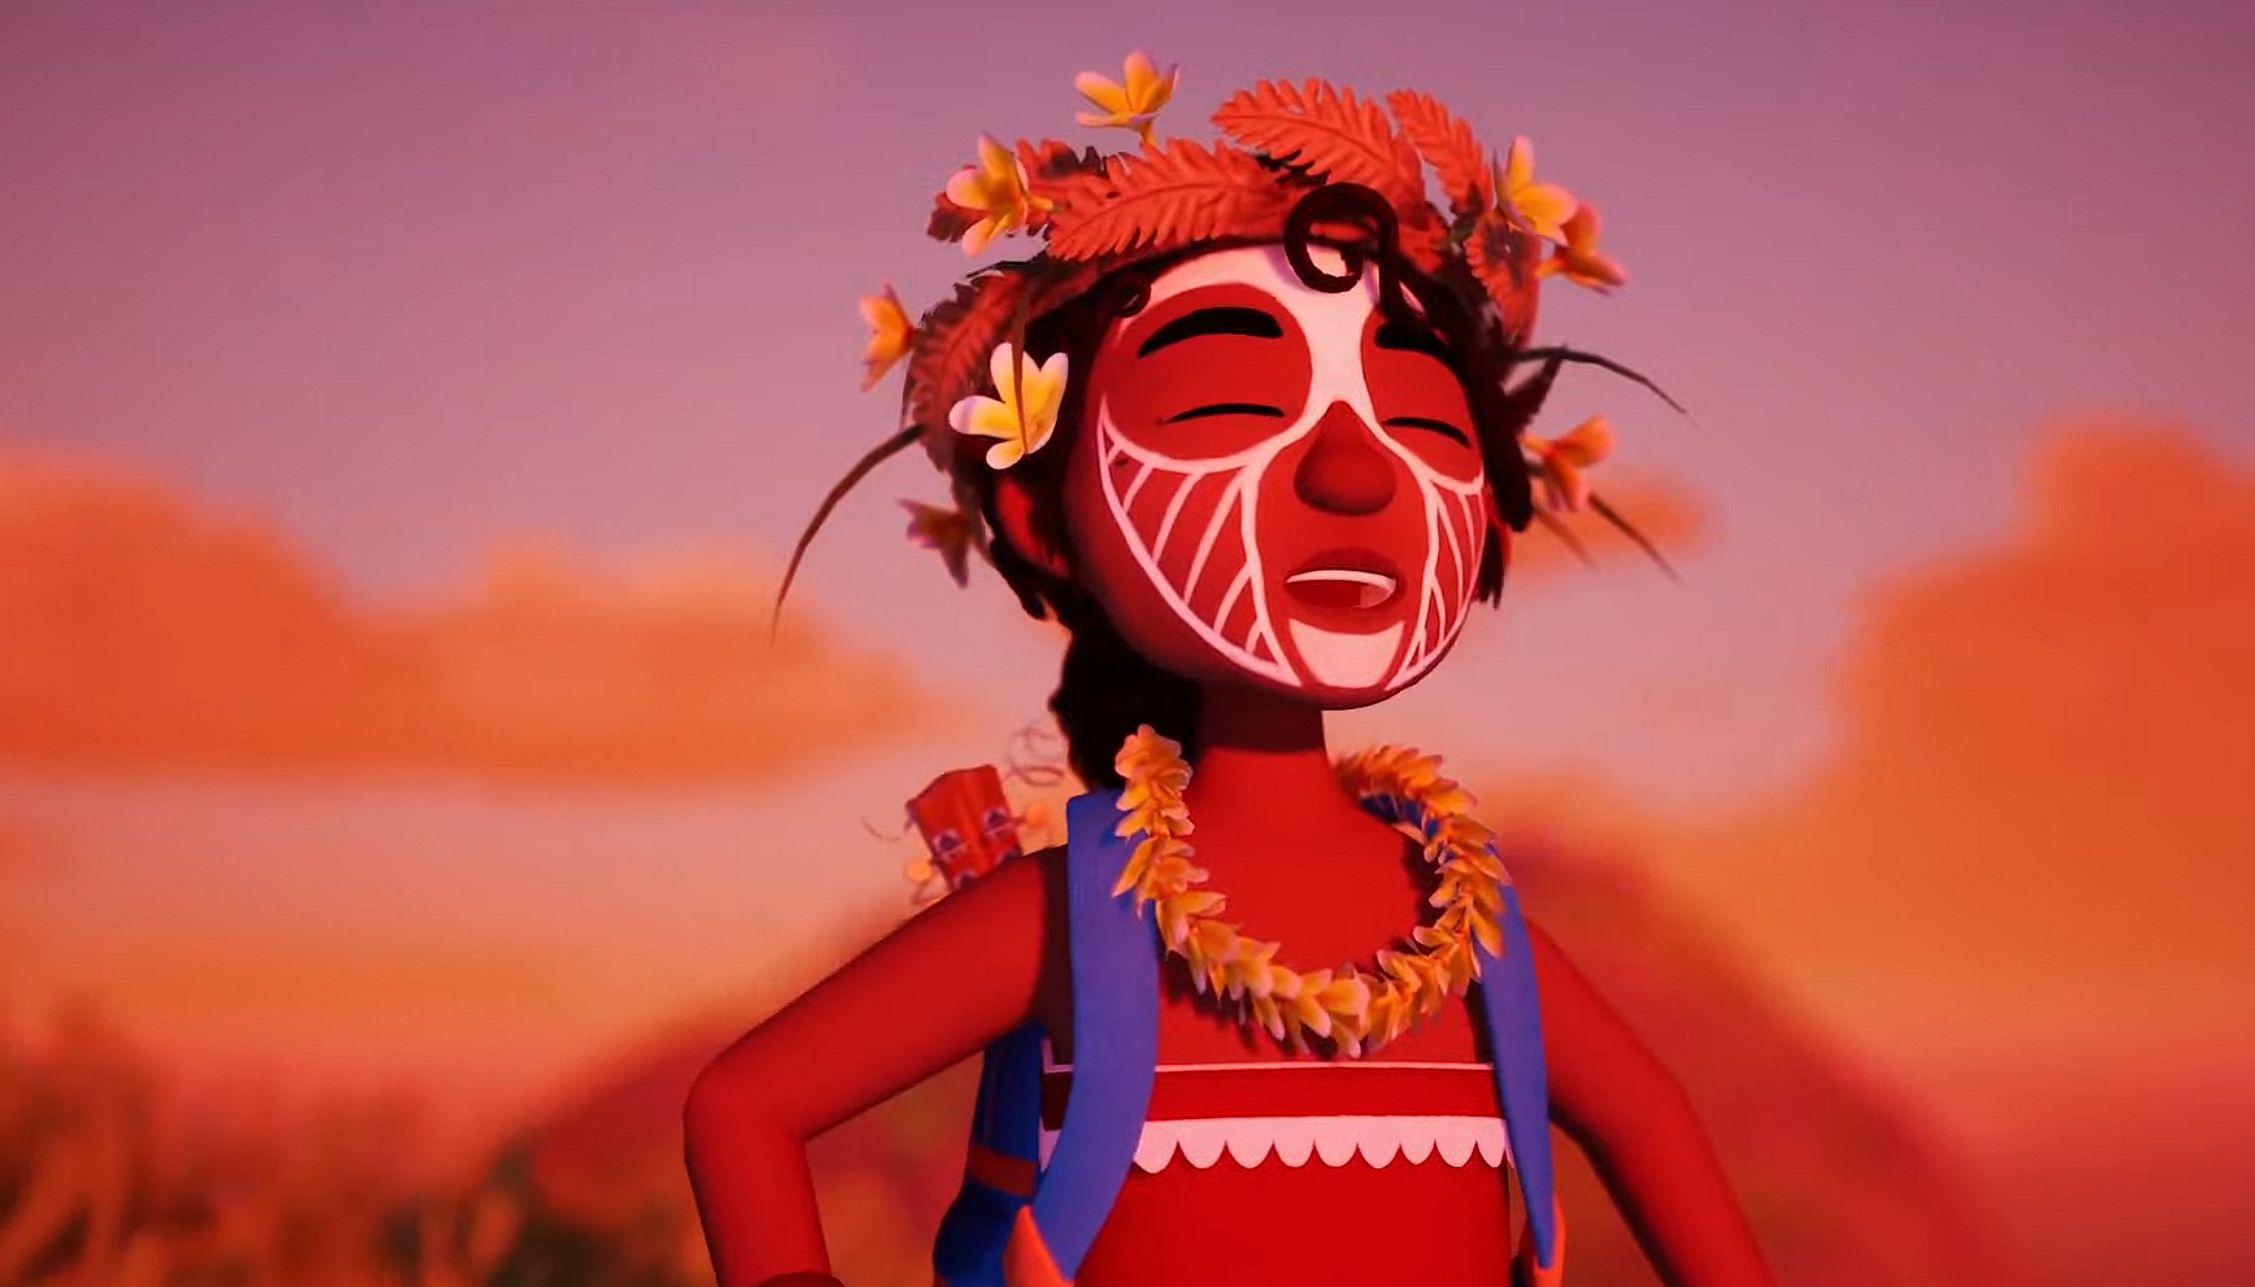 Image for Tchia is a lovely open-world adventure inspired by New Caledonia culture